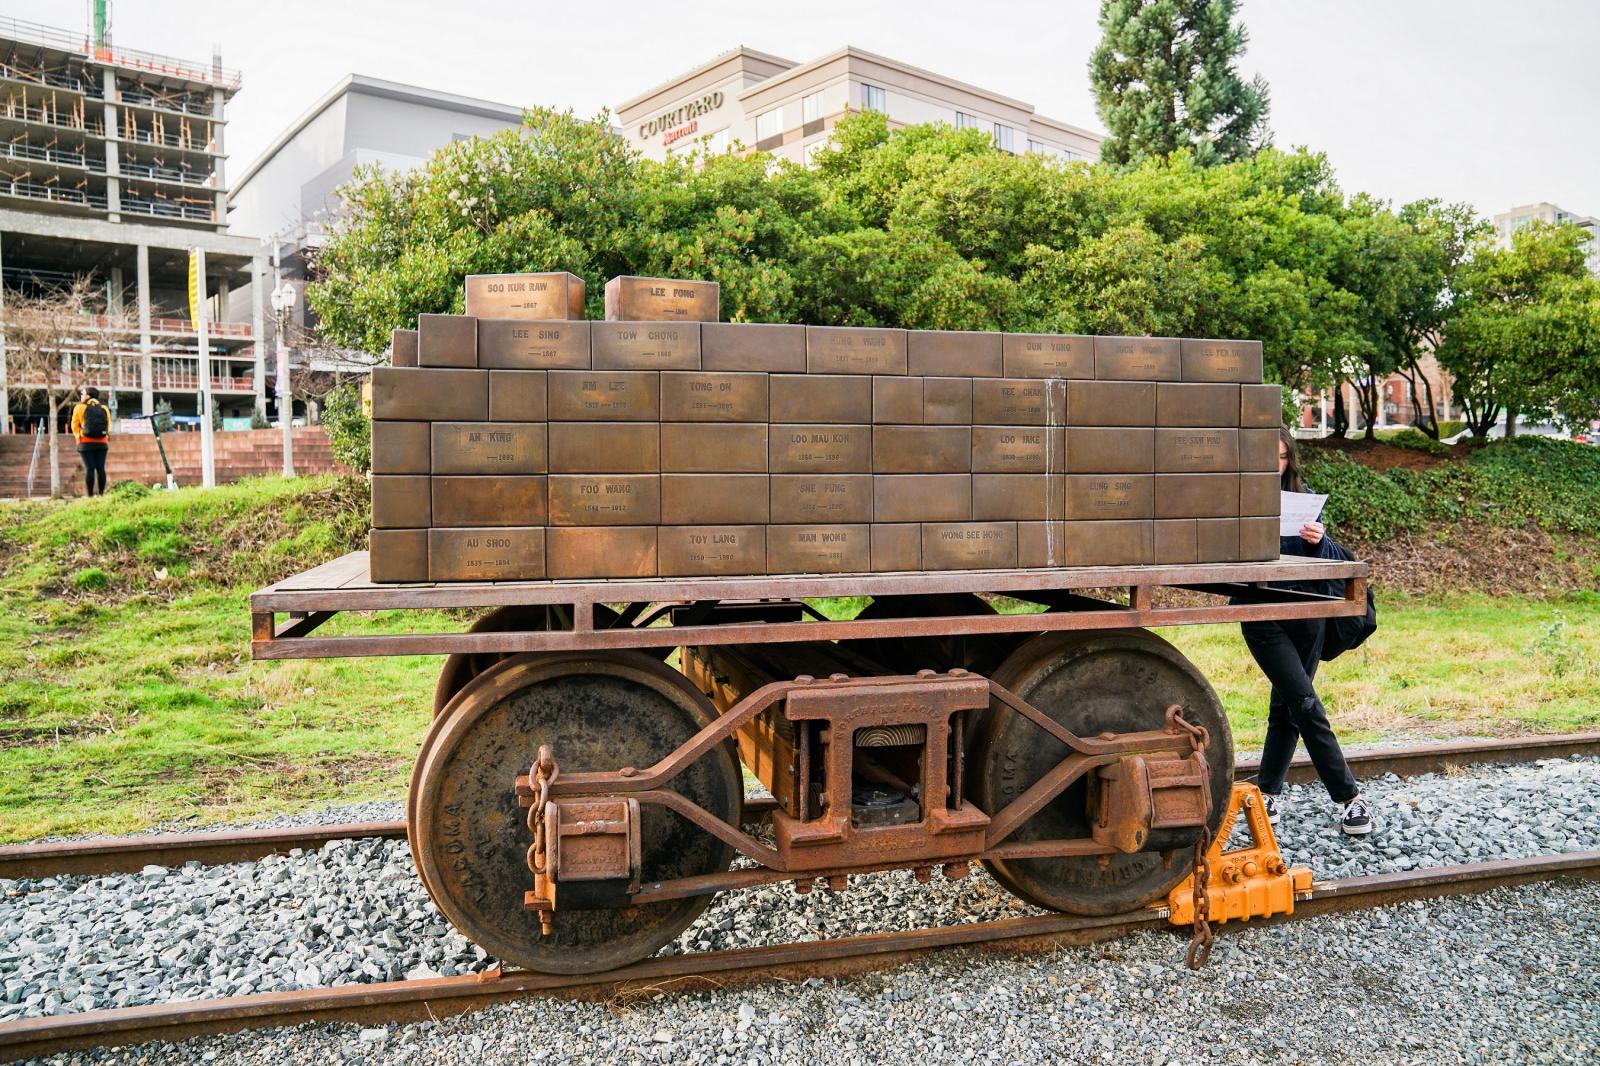 A photo of a bronze sculpture called Shipment to China. The sculpture includes roughly a hundred small bronze boxes on top of an antique train truck.